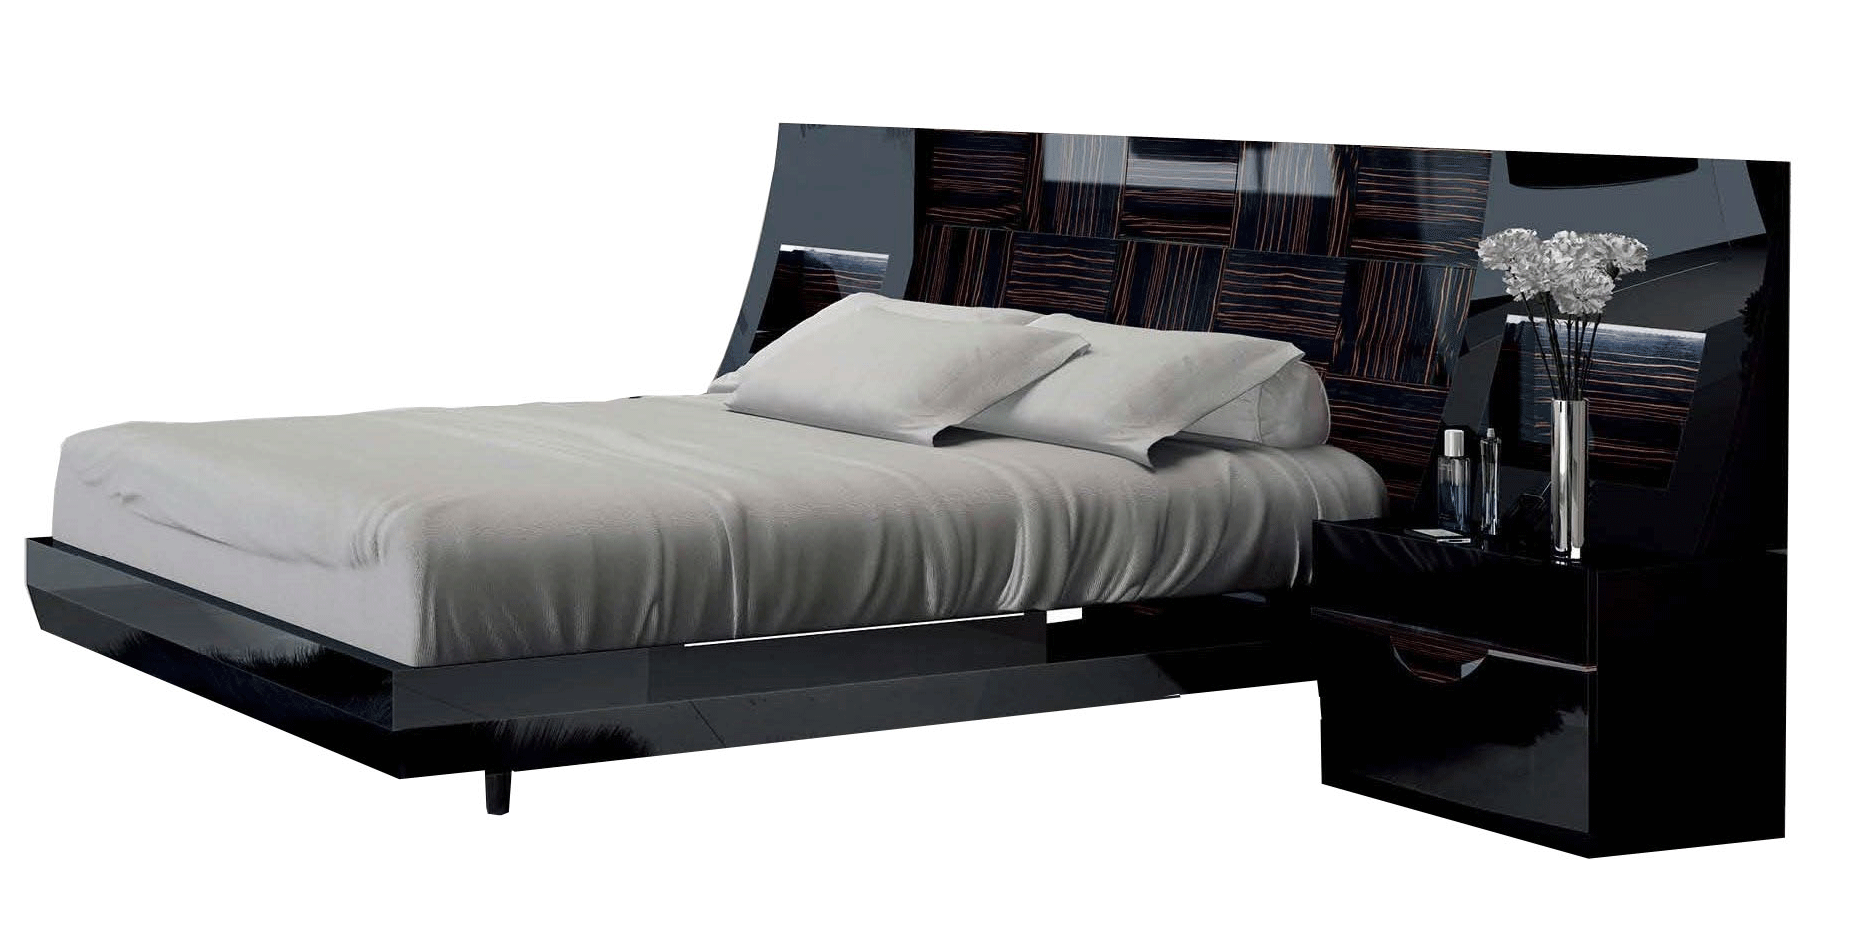 Bedroom Furniture Mirrors Marbella Bed QS bed ONLY